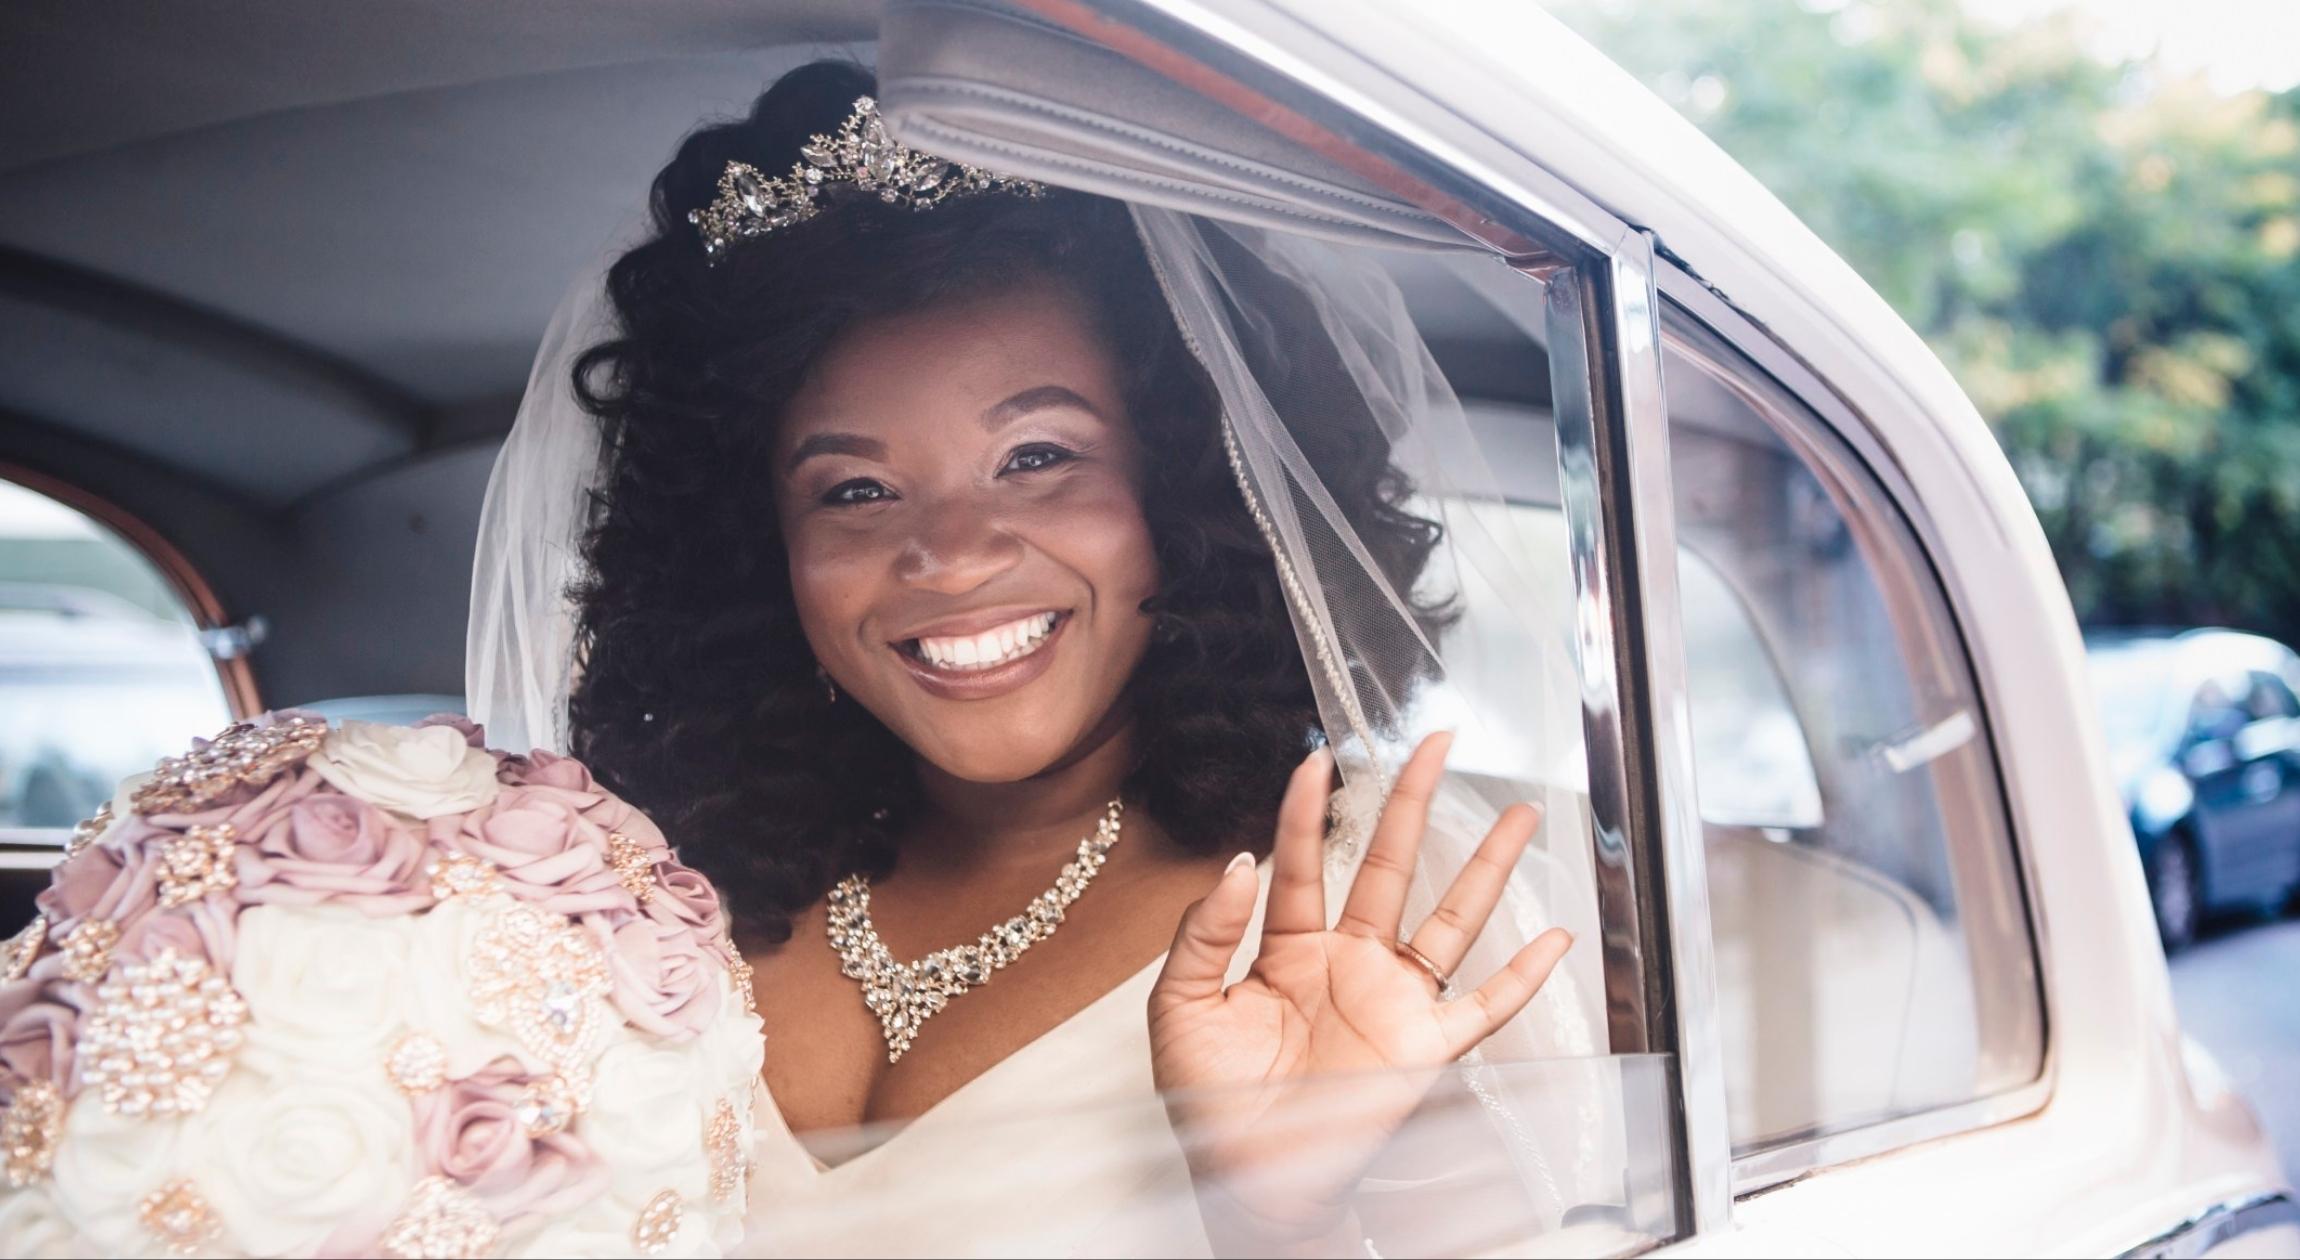 A Black bride in a wedding dress holding a bouquet waving from inside of a car